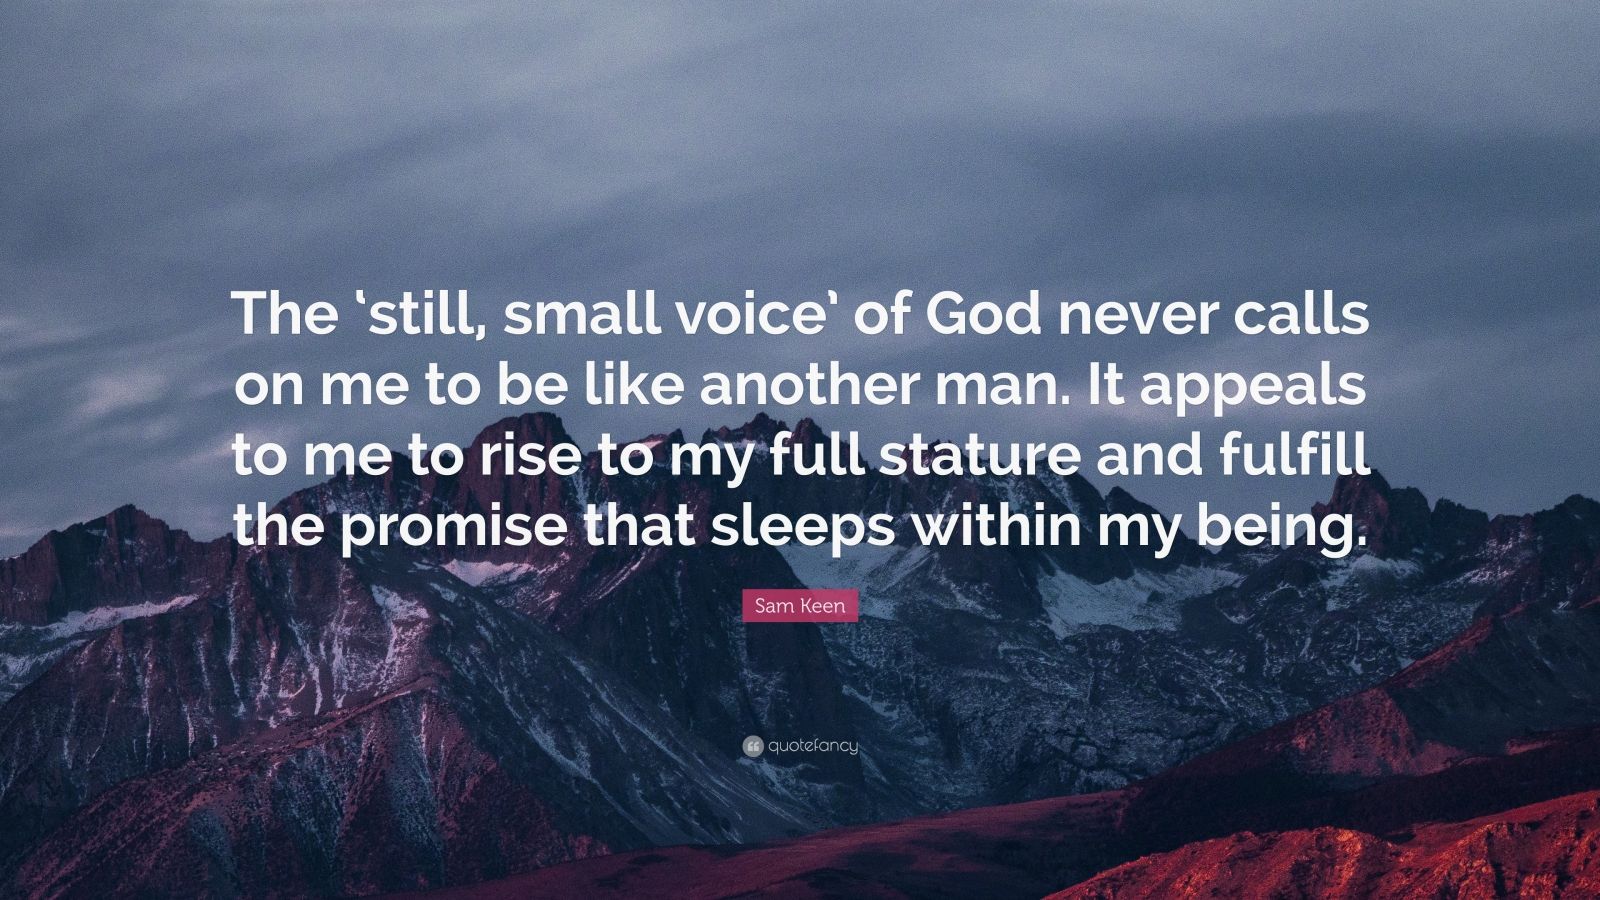 Sam Keen Quote: "The 'still, small voice' of God never calls on me to be like another man. It ...